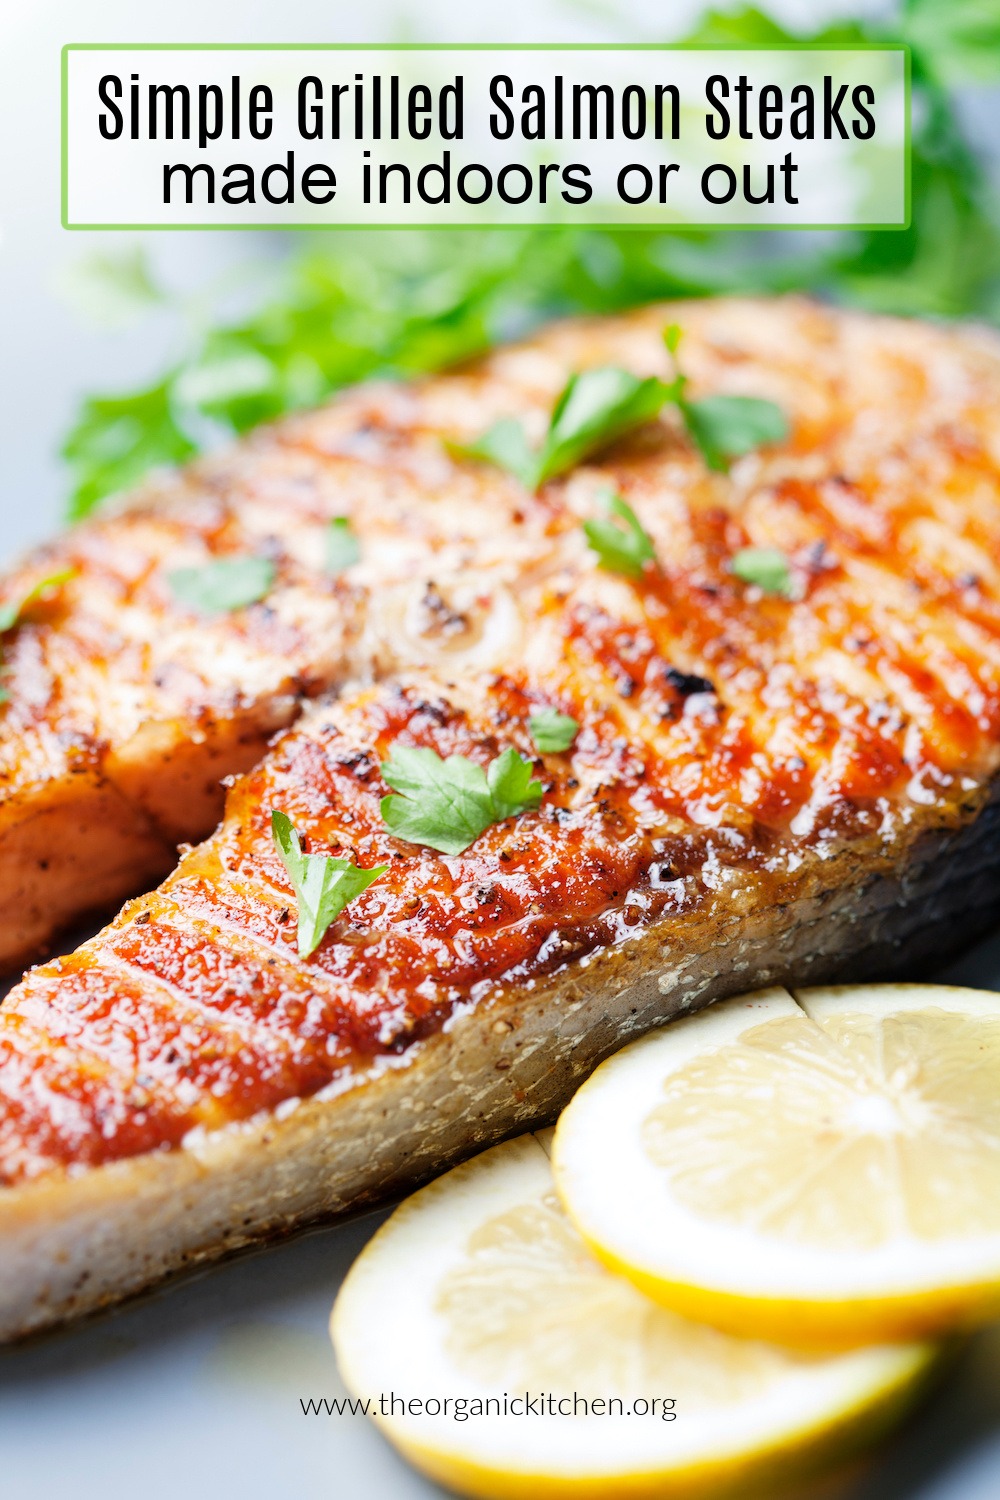 Simple Grilled Salmon Steak garnished with lemon and herbs